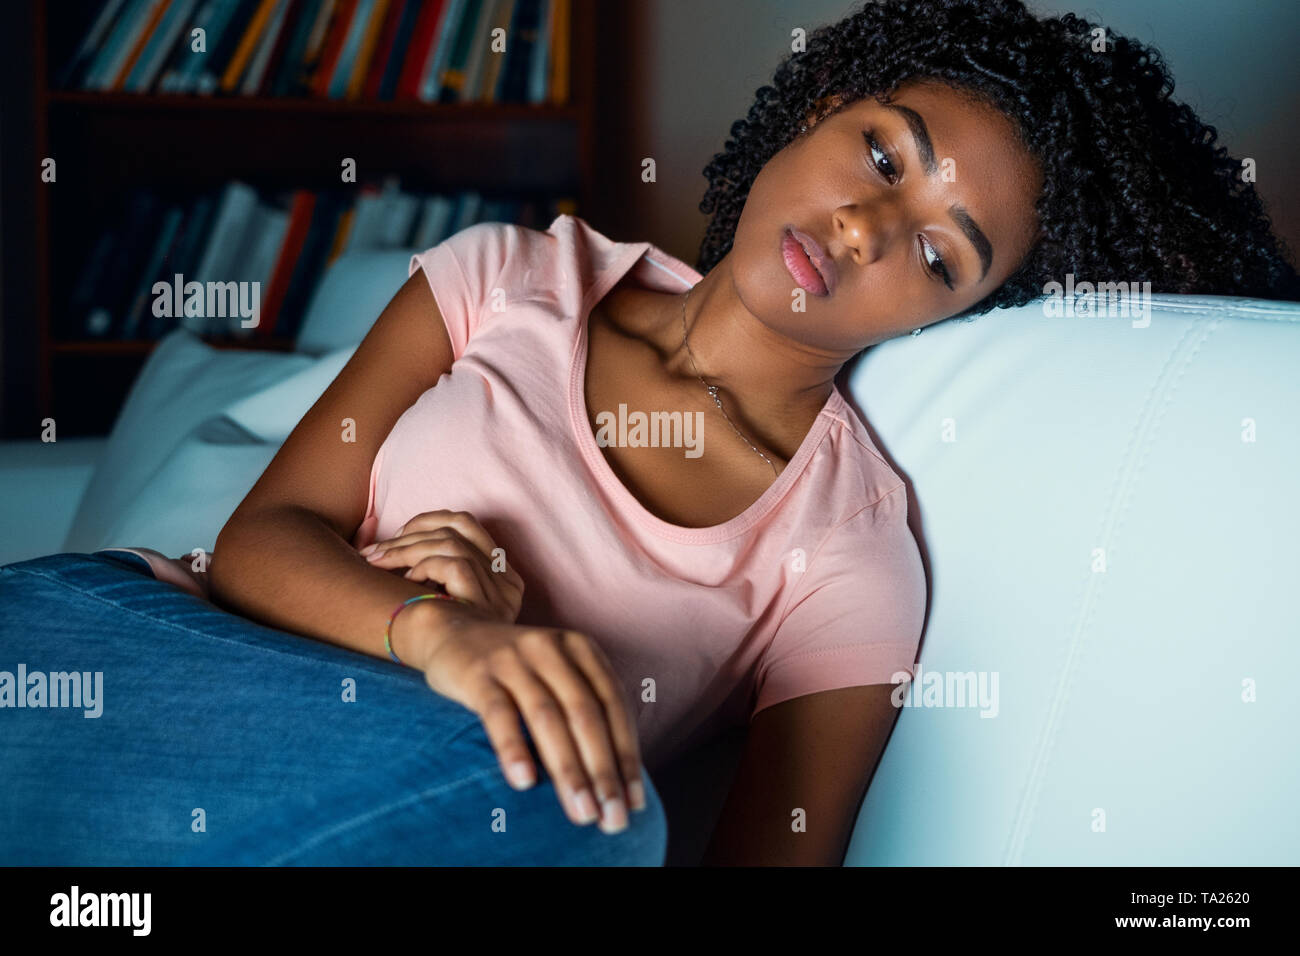 Portrait of troubled black girl with negative feelings Stock Photo